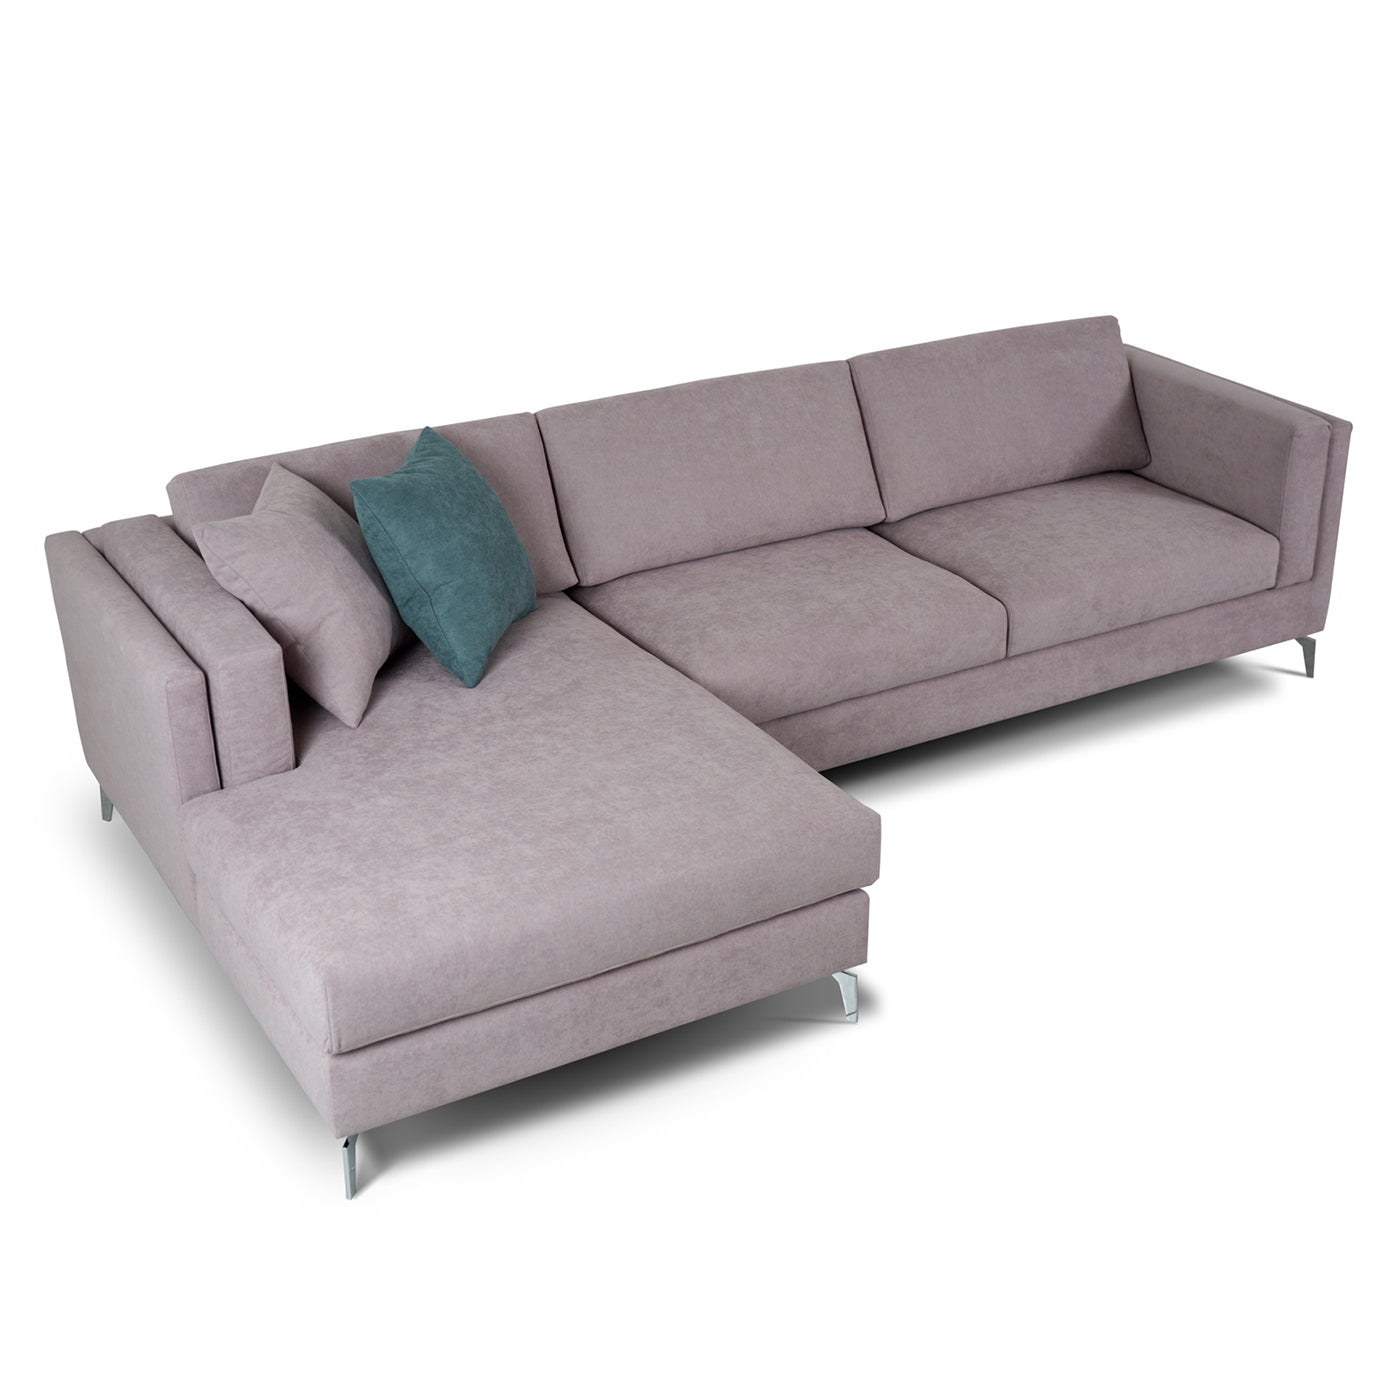 Giotto L-Shaped Pink Sofa - Alternative view 4